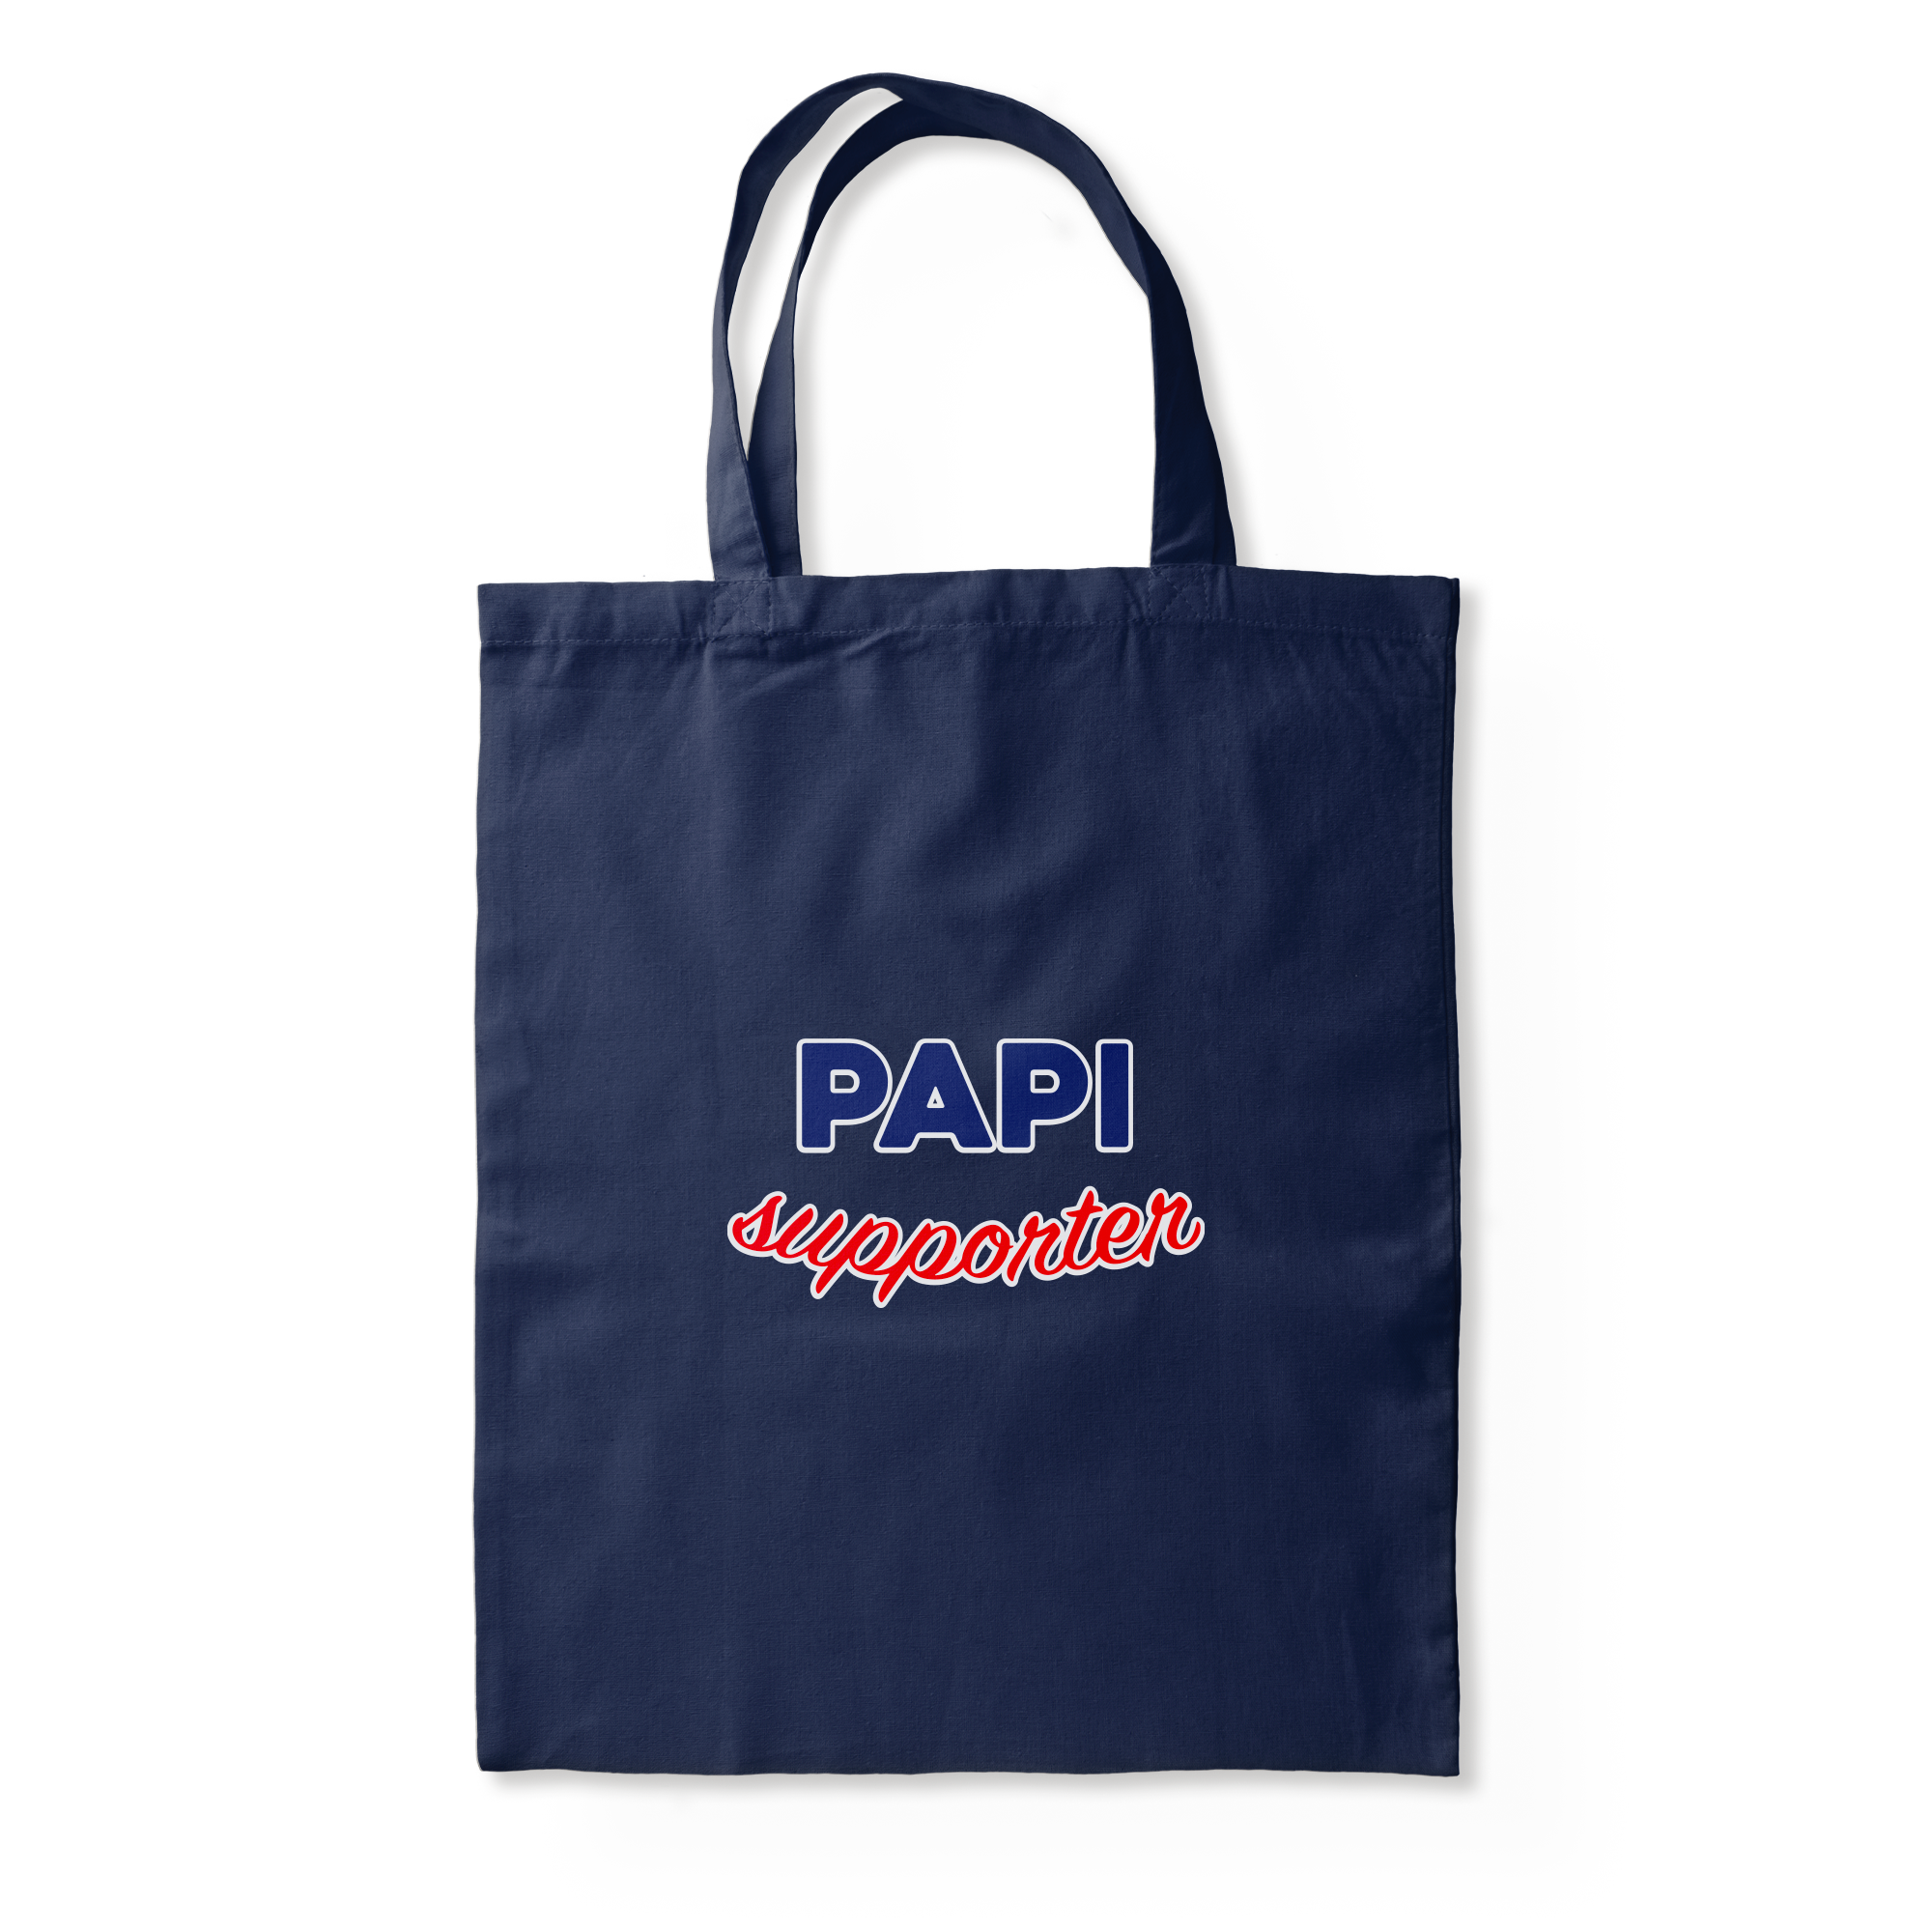 PAPI supporter - TOTE BAG